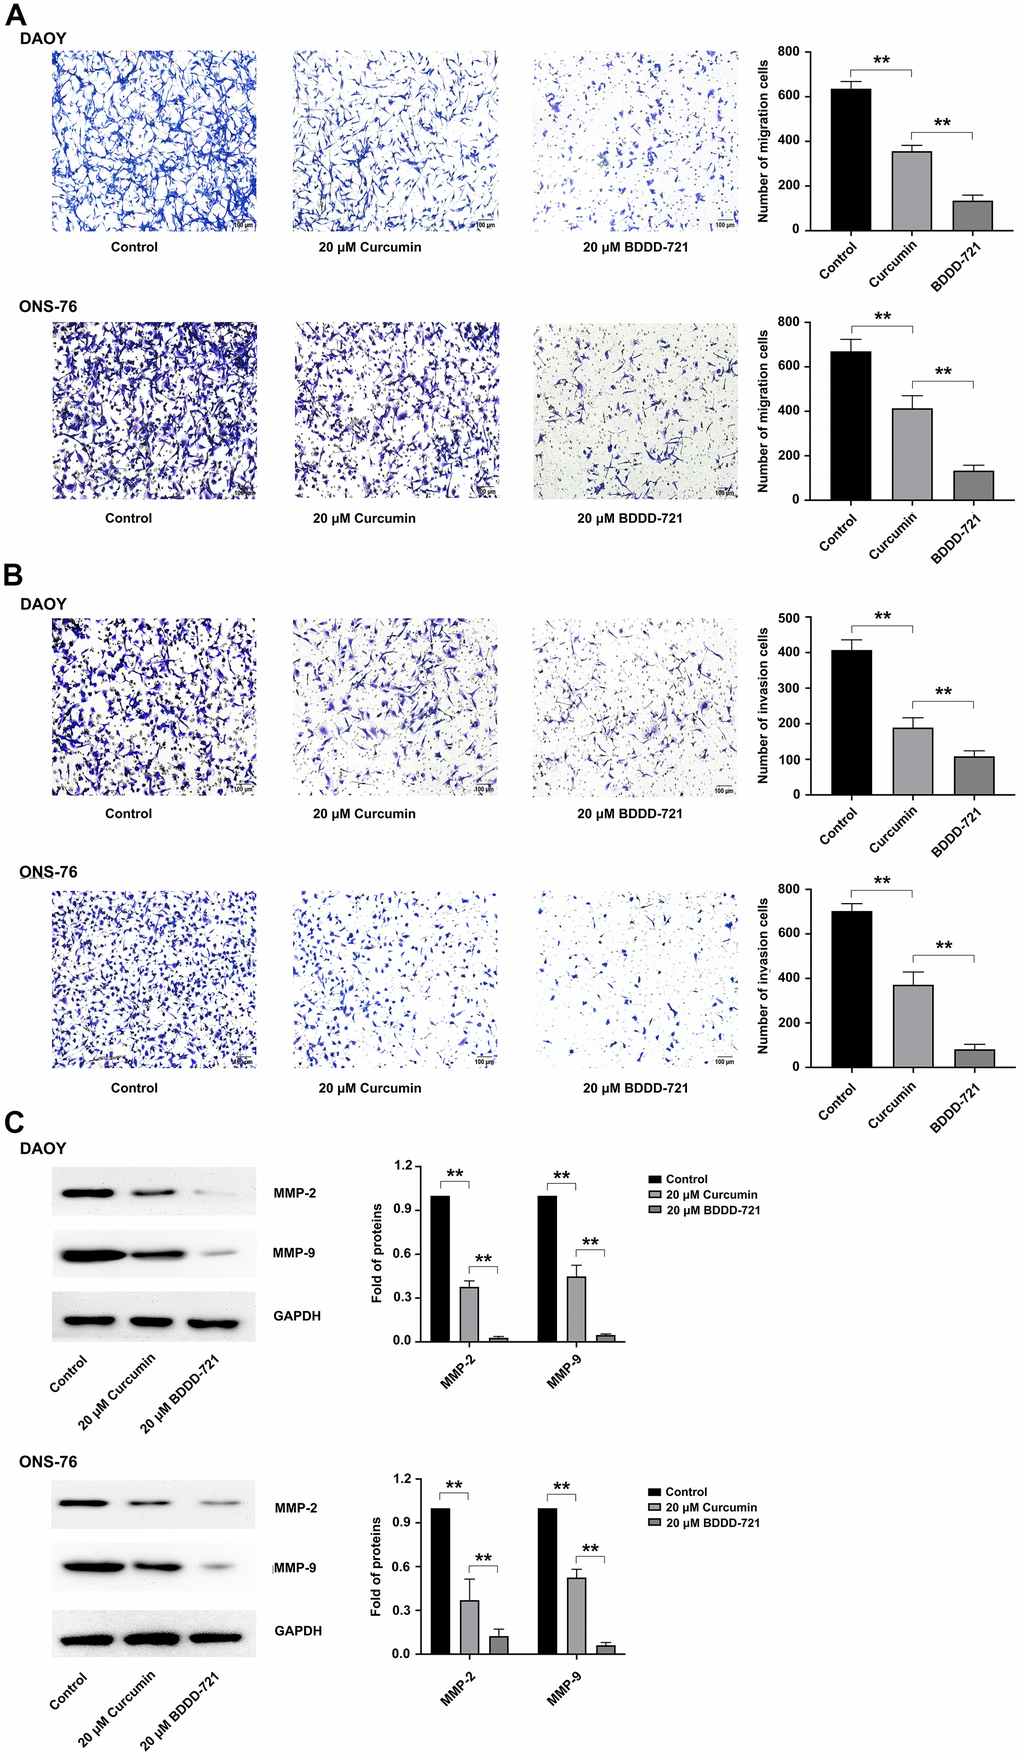 Effects of BDDD-721 and curcumin on cell migration and invasion of medulloblastoma cells. (A) Cell migration ability was analyzed by Transwell assay without coated Matrigel. (B) Cell invasion ability was measured by Transwell assay with coated with Matrigel. (C) MMP-2 and MMP-9 proteins were detected by western blot after 20 μM curcumin or BDDD-721 treatment for 24h.